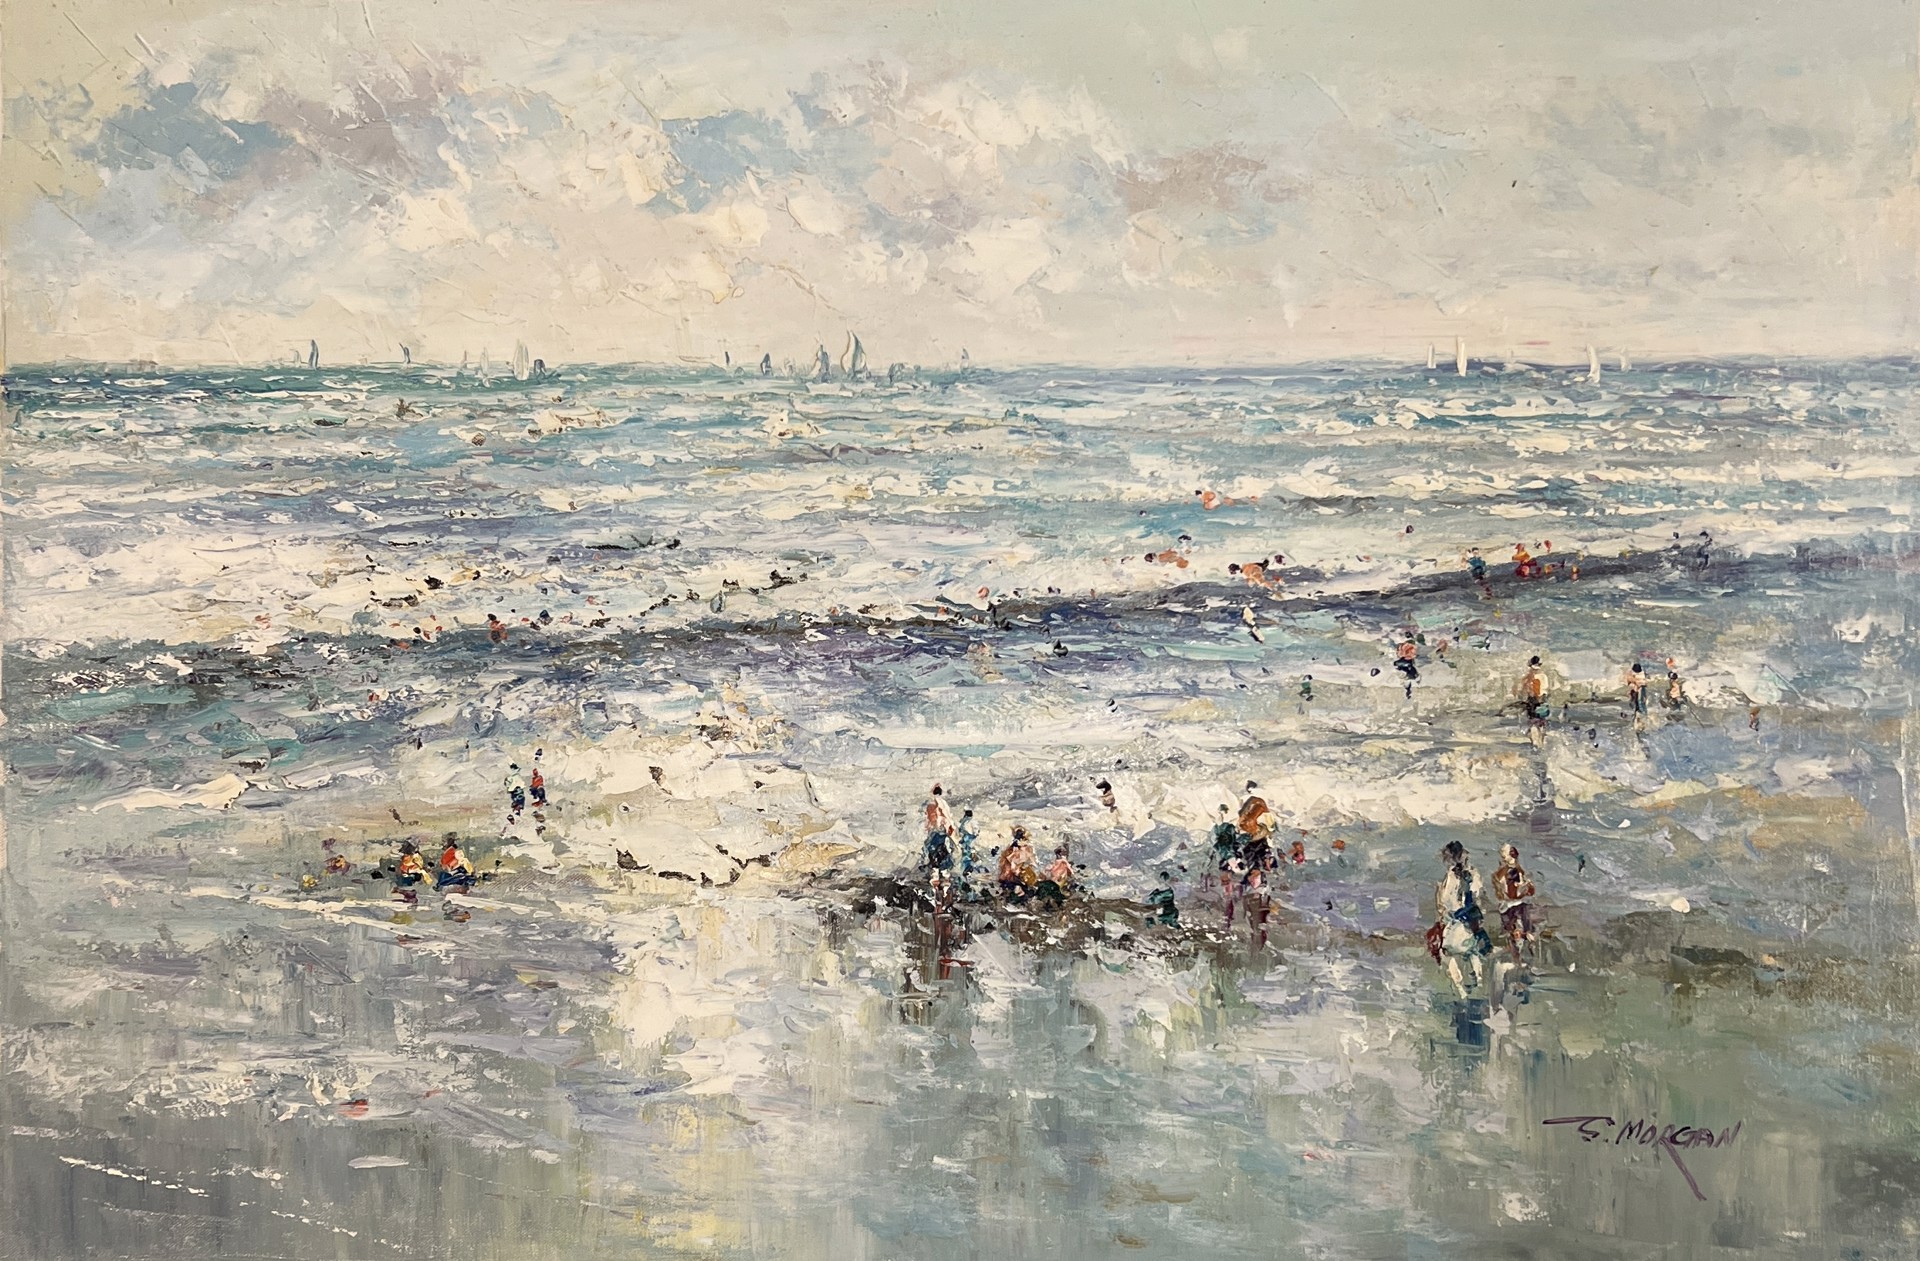 PEOPLE AT THE BEACH by J MORGAN